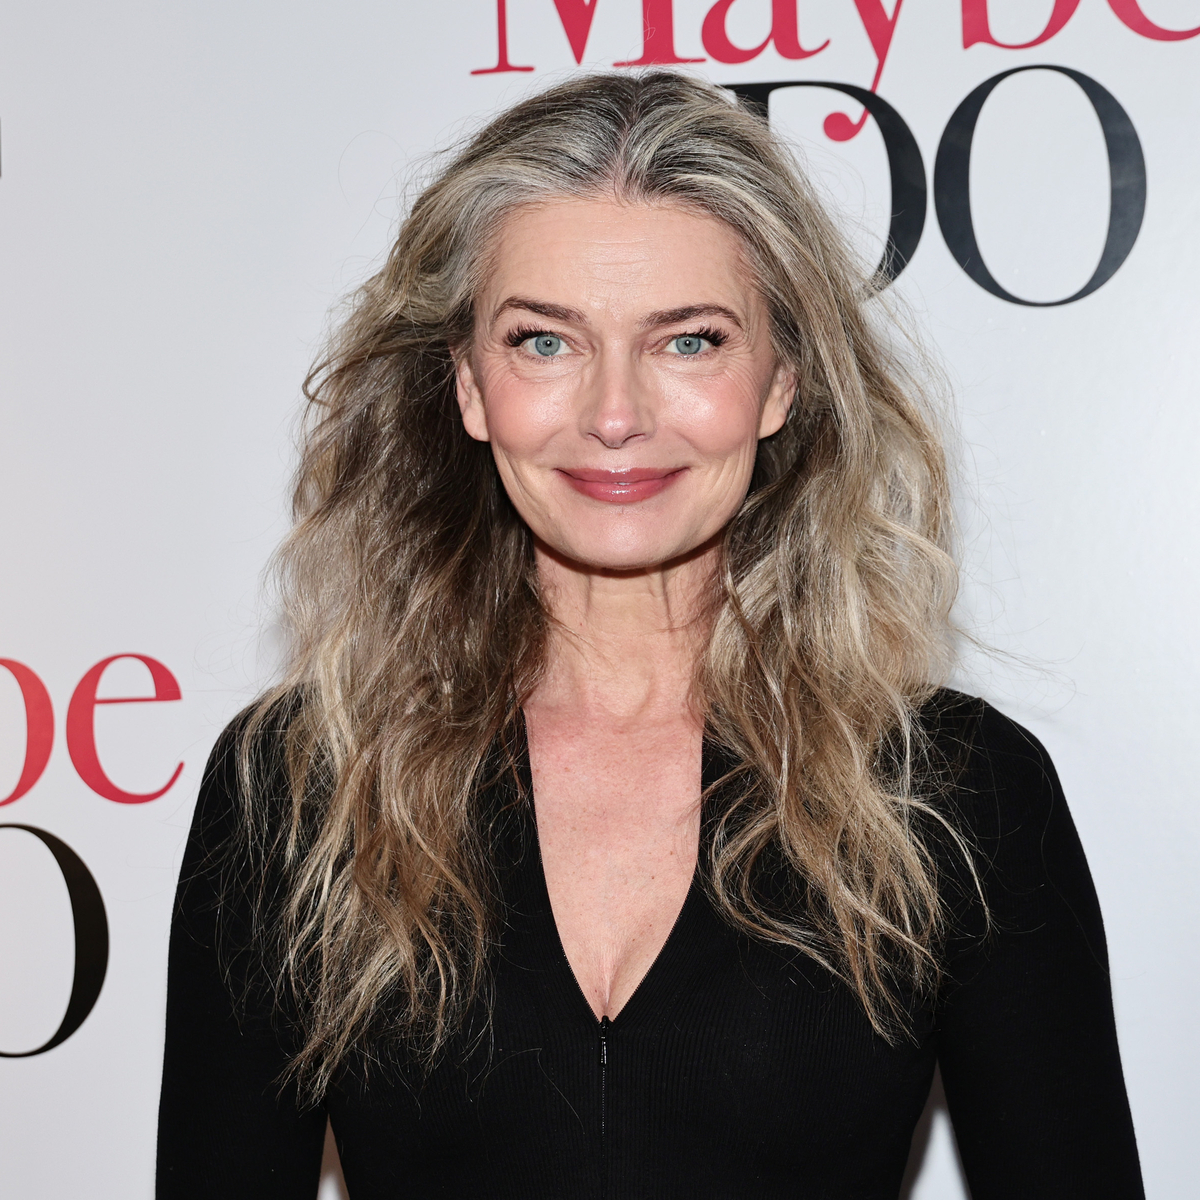 Paulina Porizkova Gets Candid About Aging With Makeup Transformation